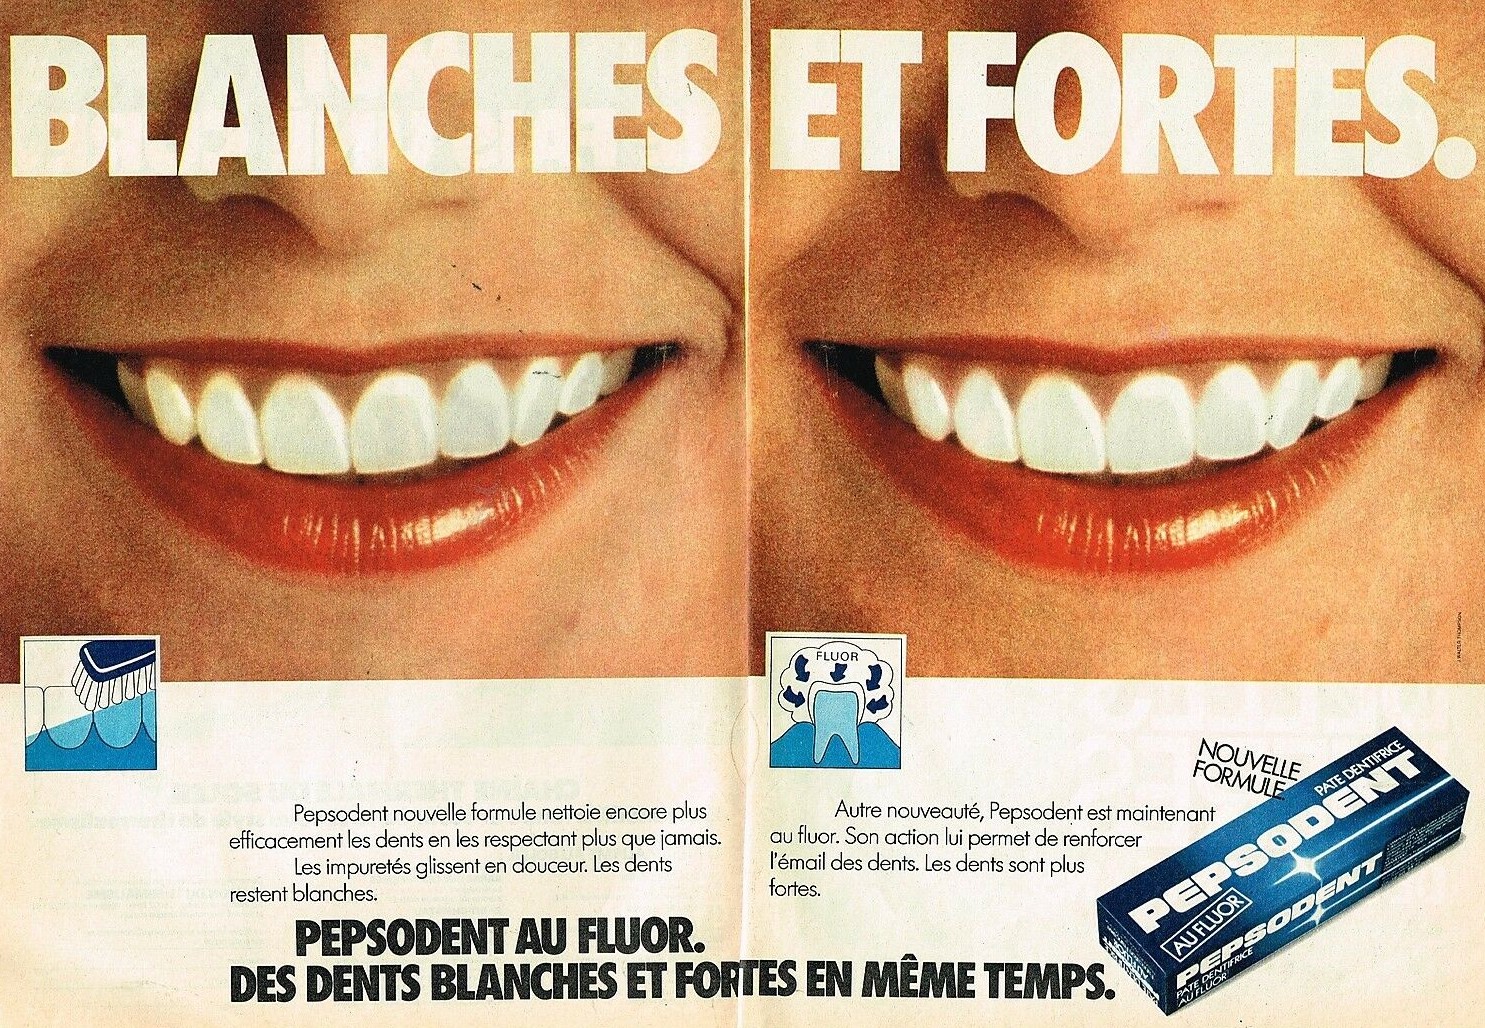 1978 Le Dentifrice Pepsodent